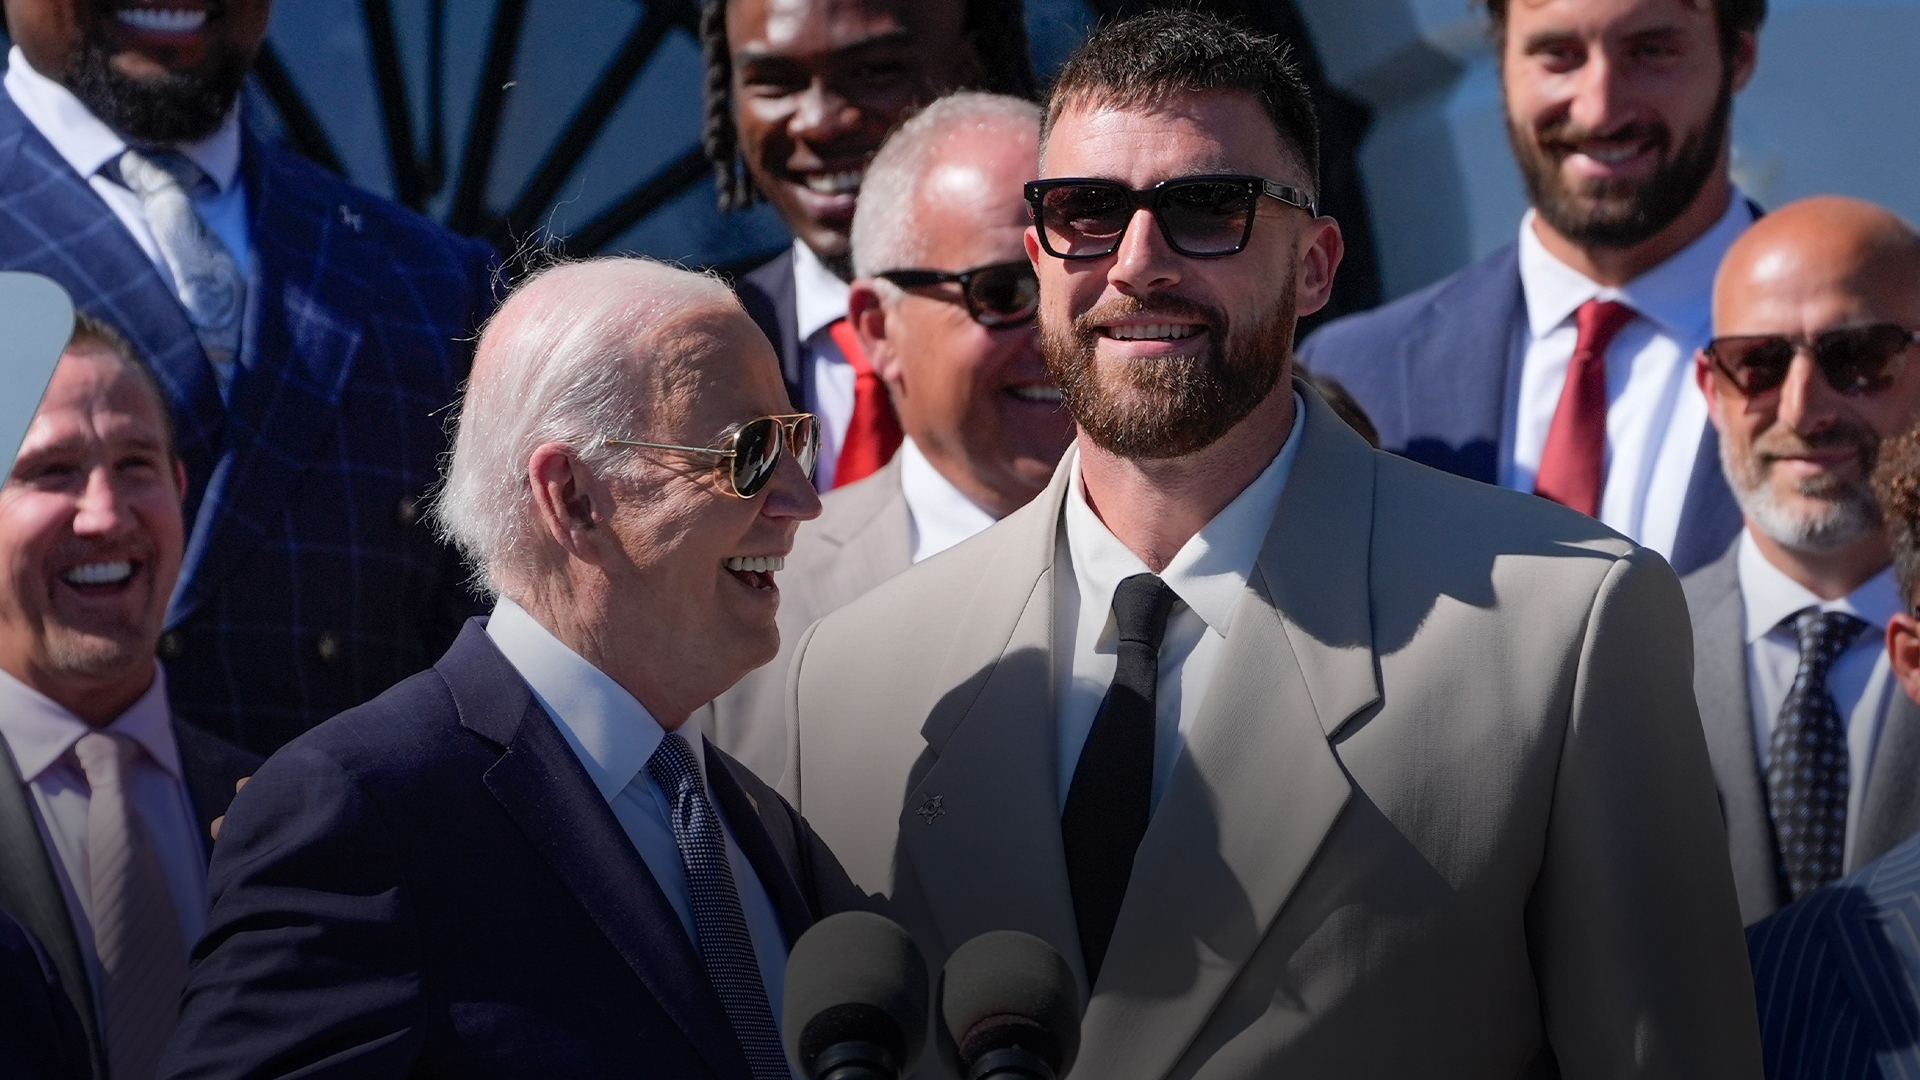 Travis Kelce gets the mic during his 2nd trip to the White House